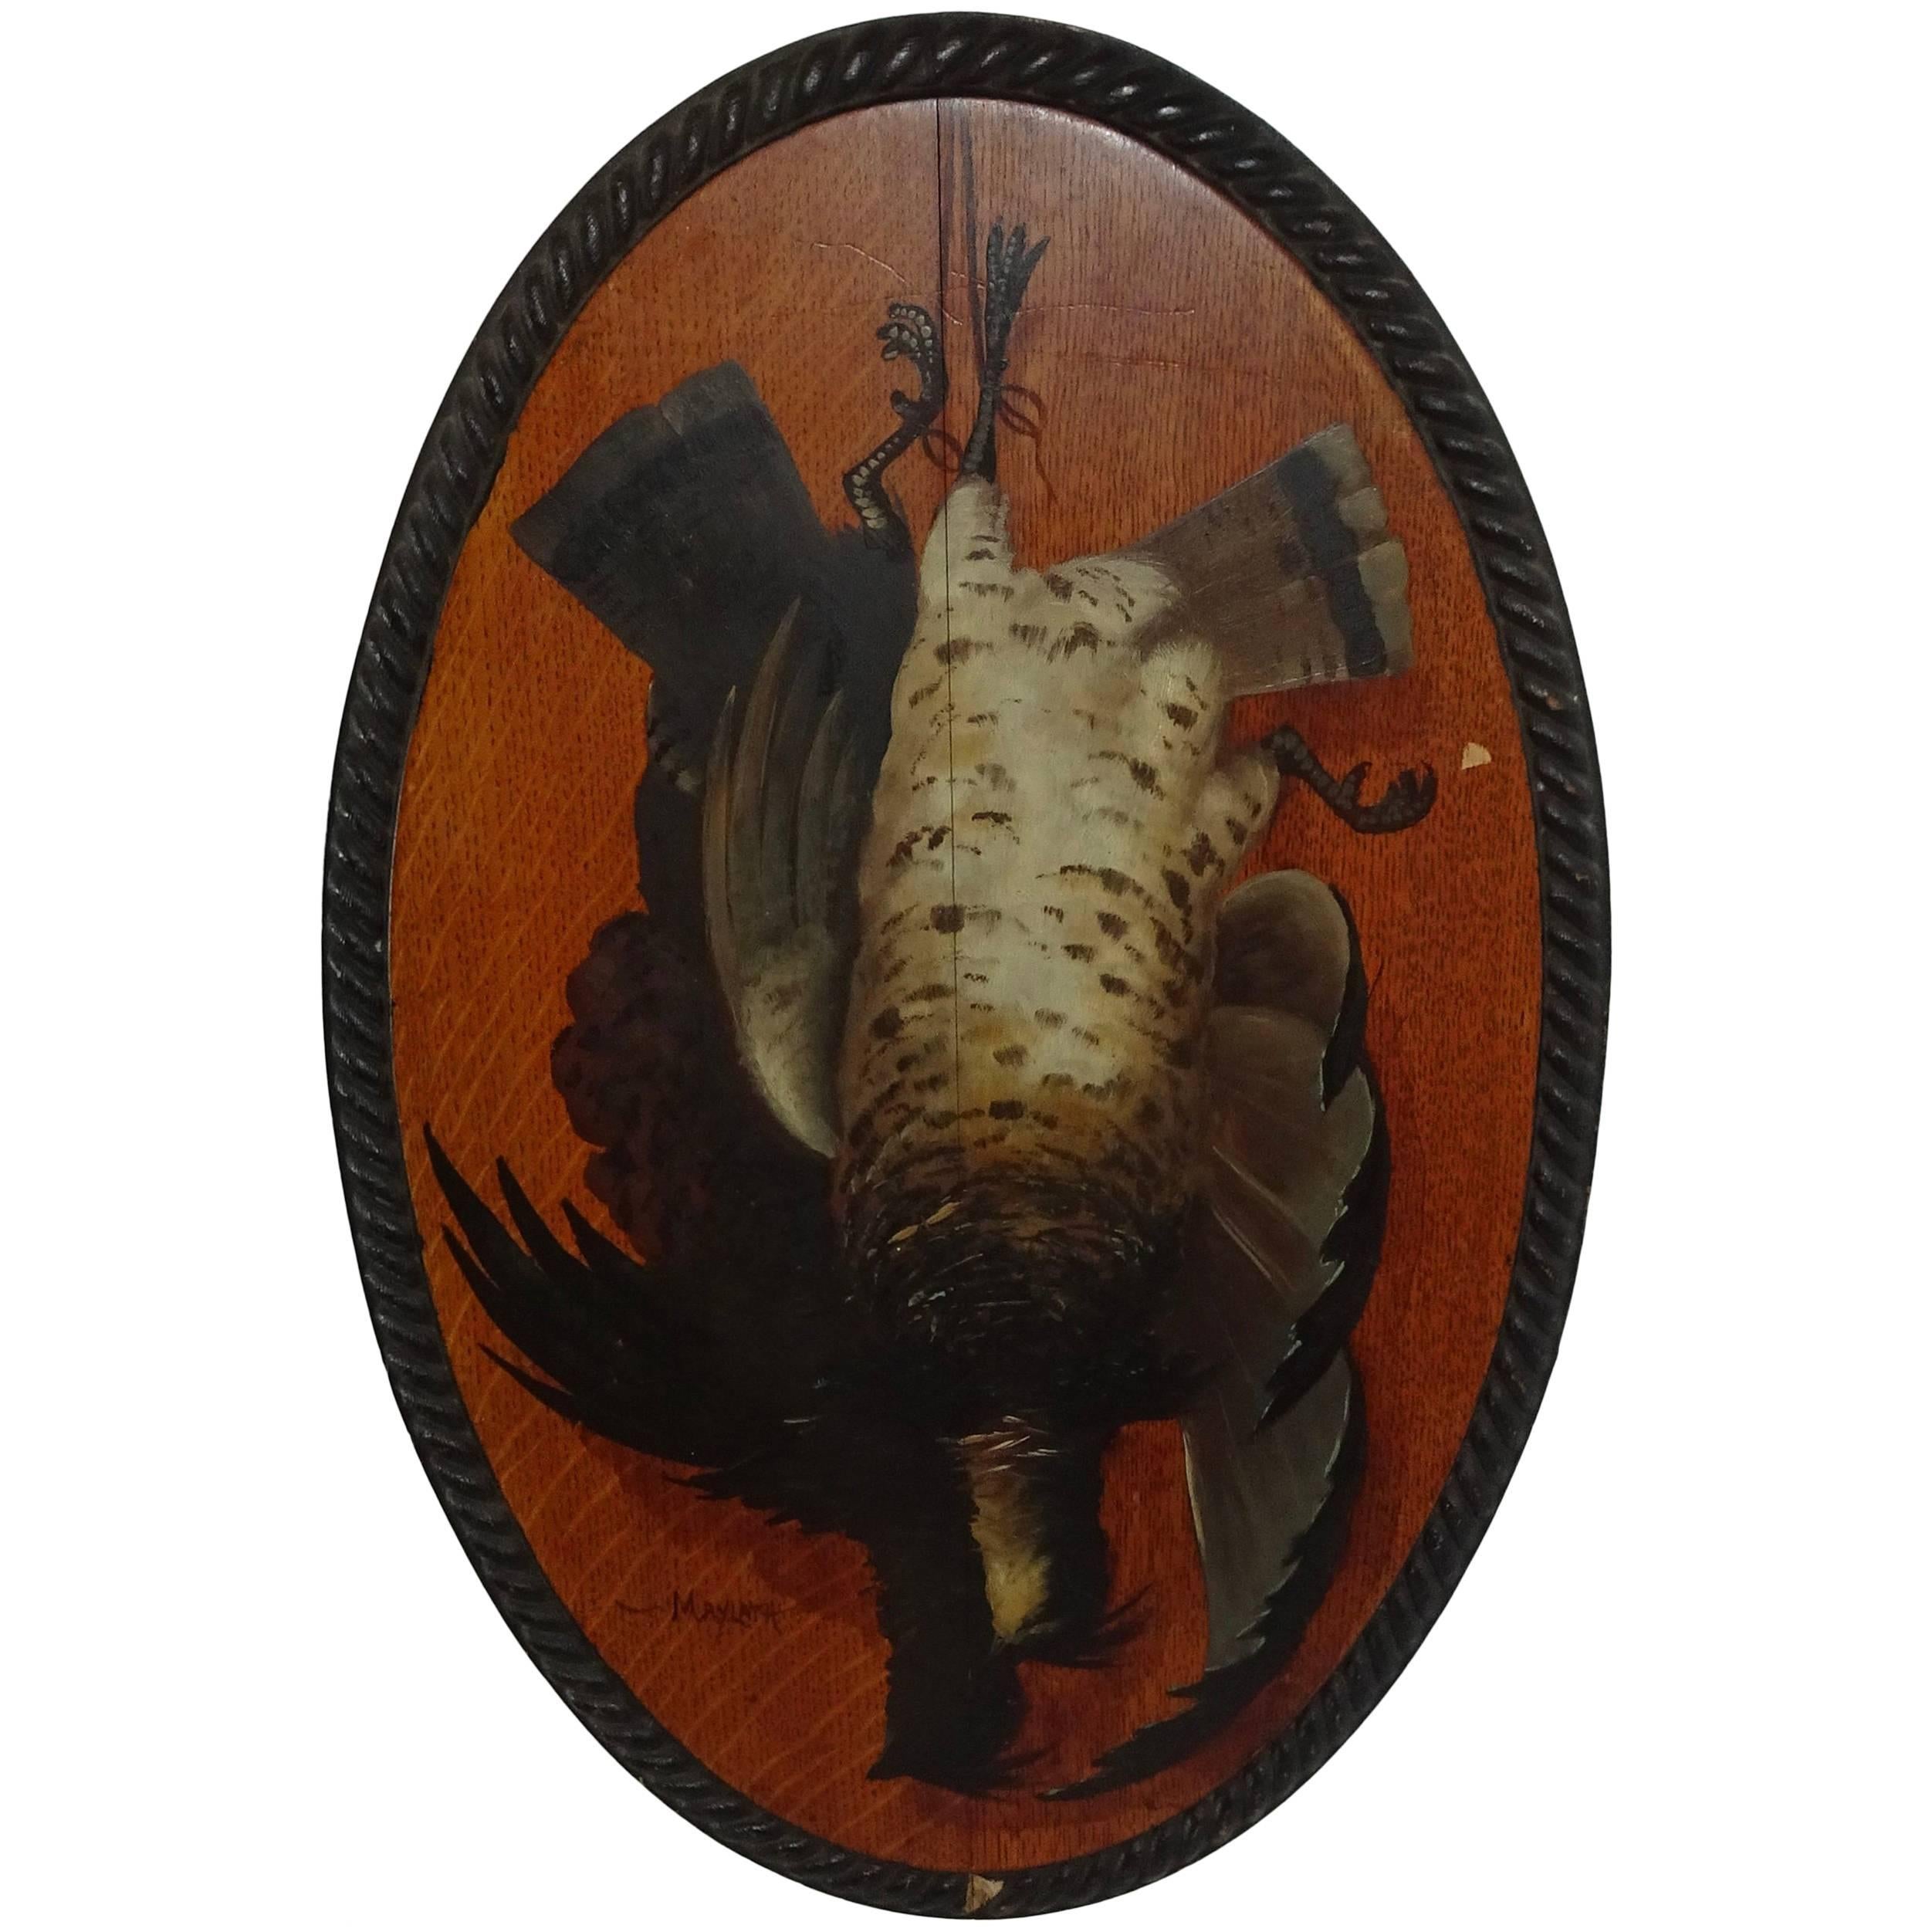  Painting of Hanging Game Bird on Oval Shaped Wood Plaque by Maylath